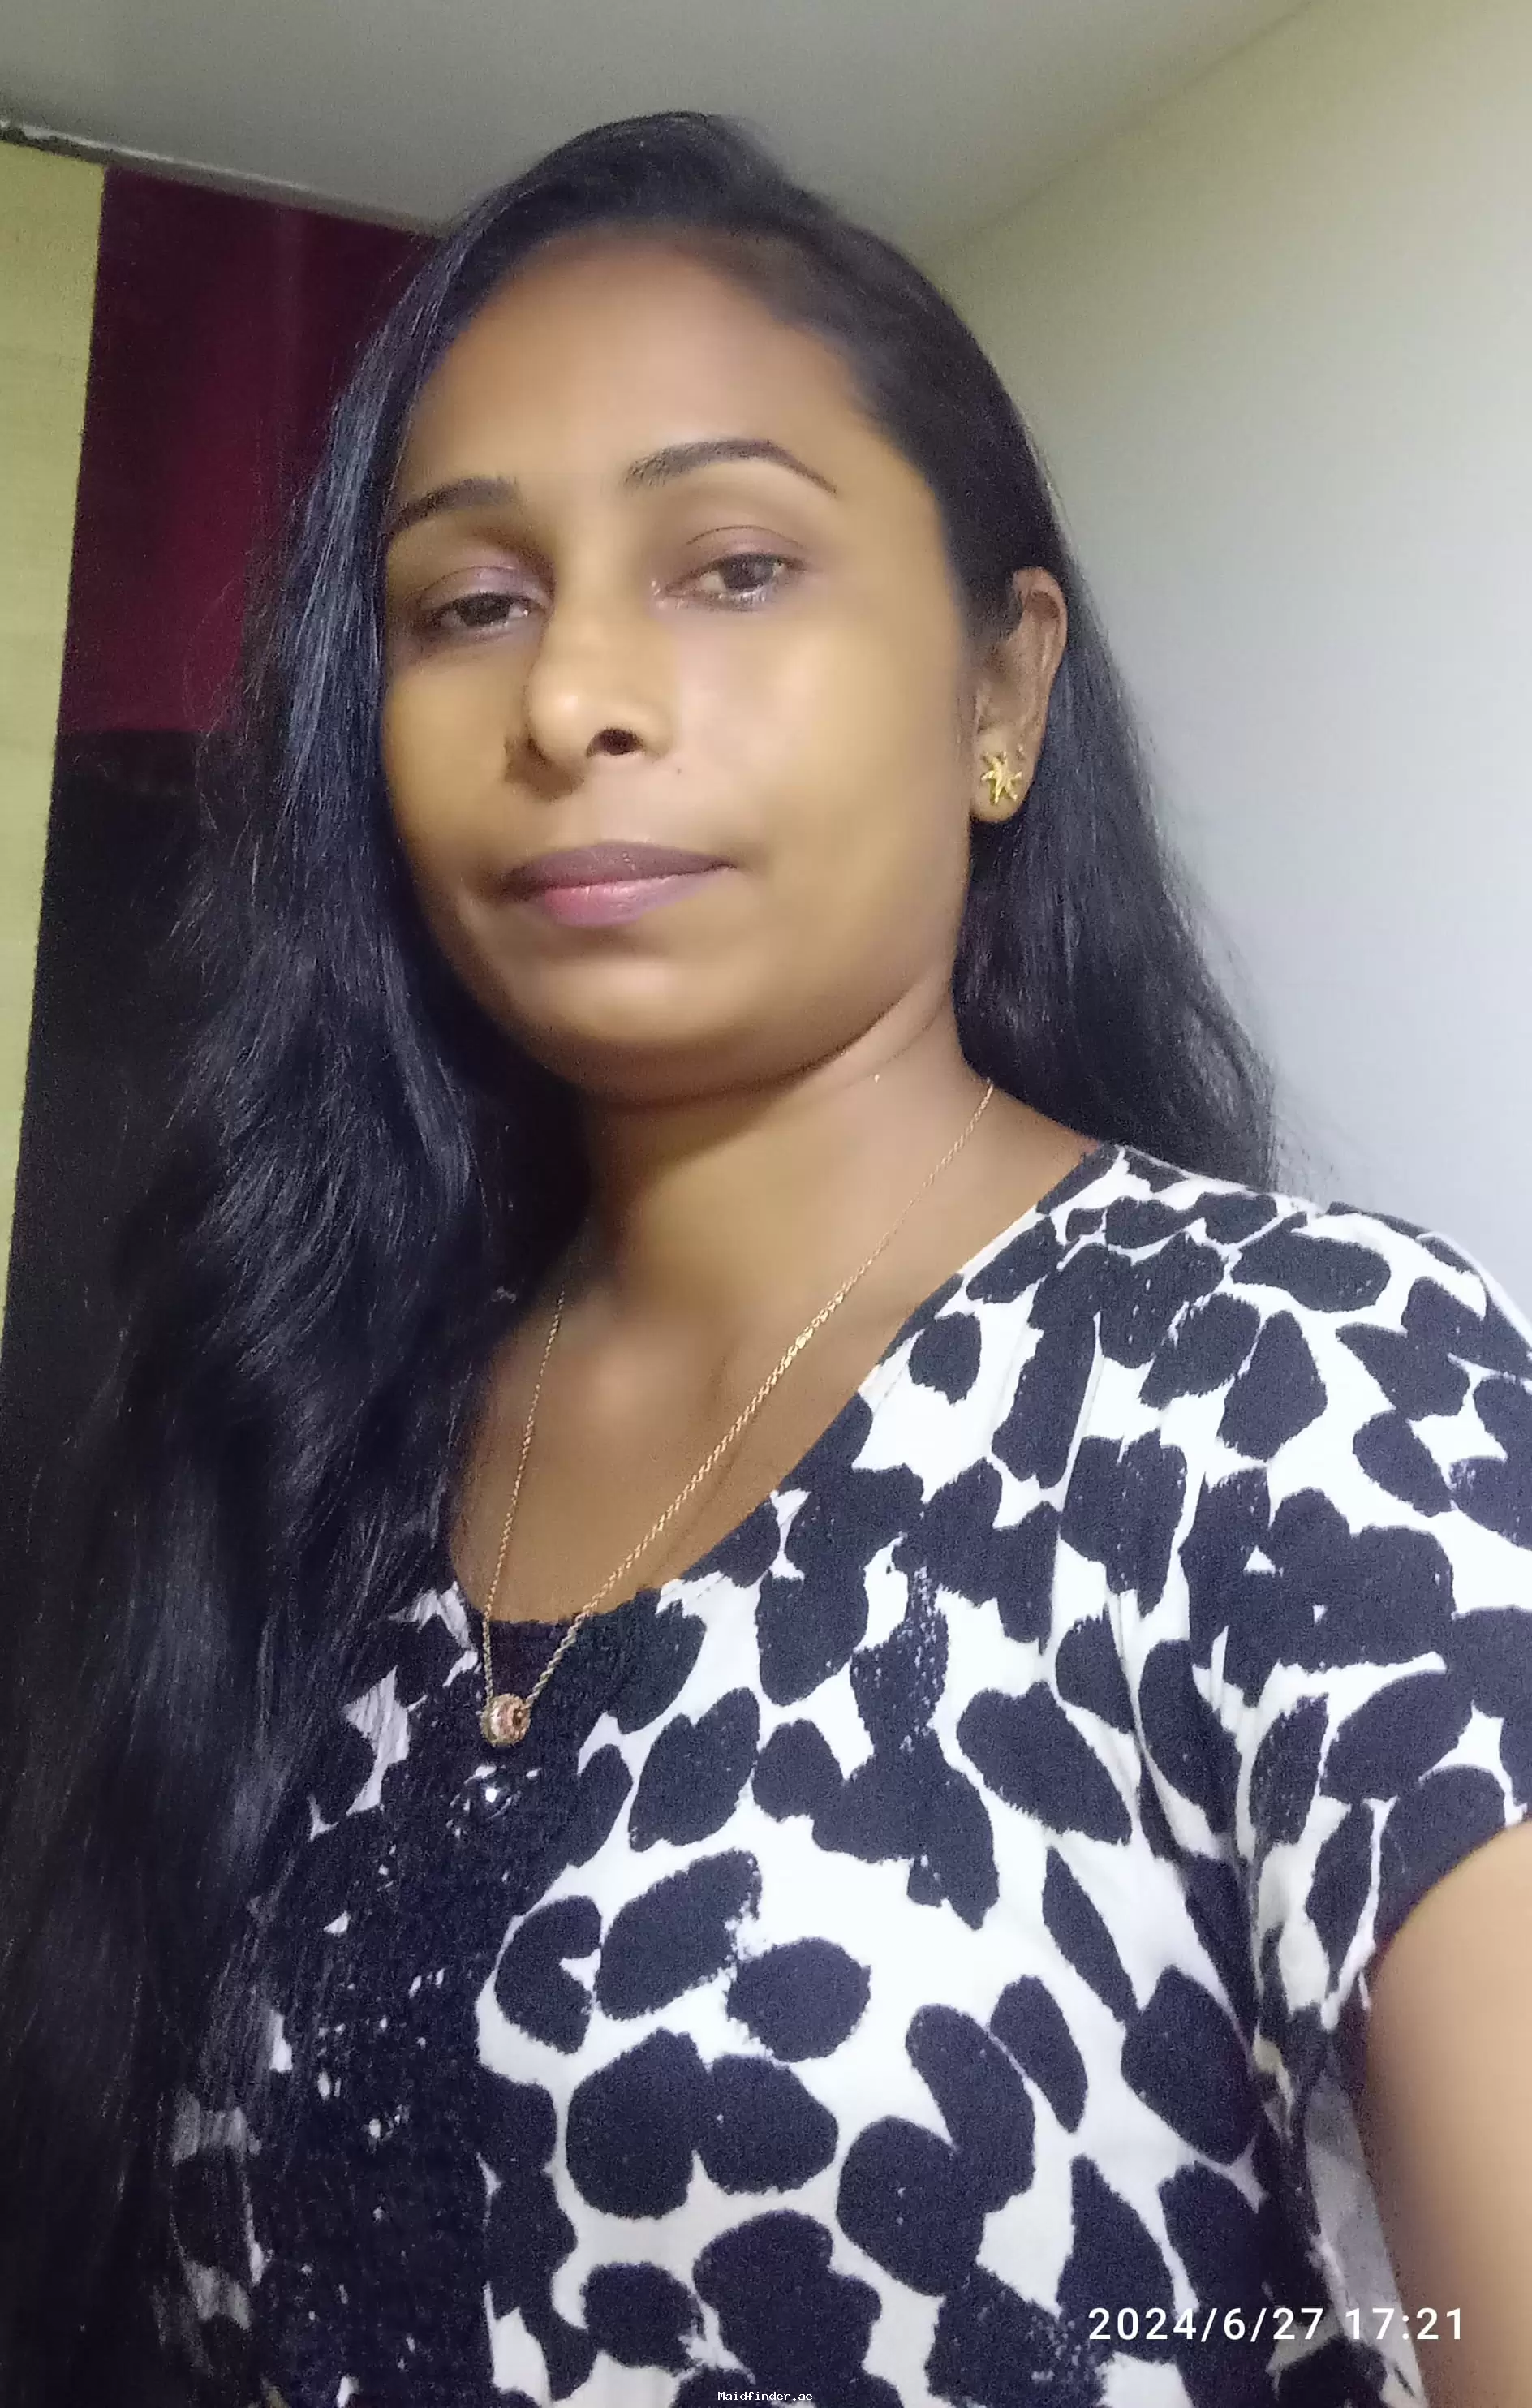 Maid Profile Picture WhatsApp_Image_2024-07-02_at_10_48_38_AM.webp /home3/xgcwidmy/public_html/maid/